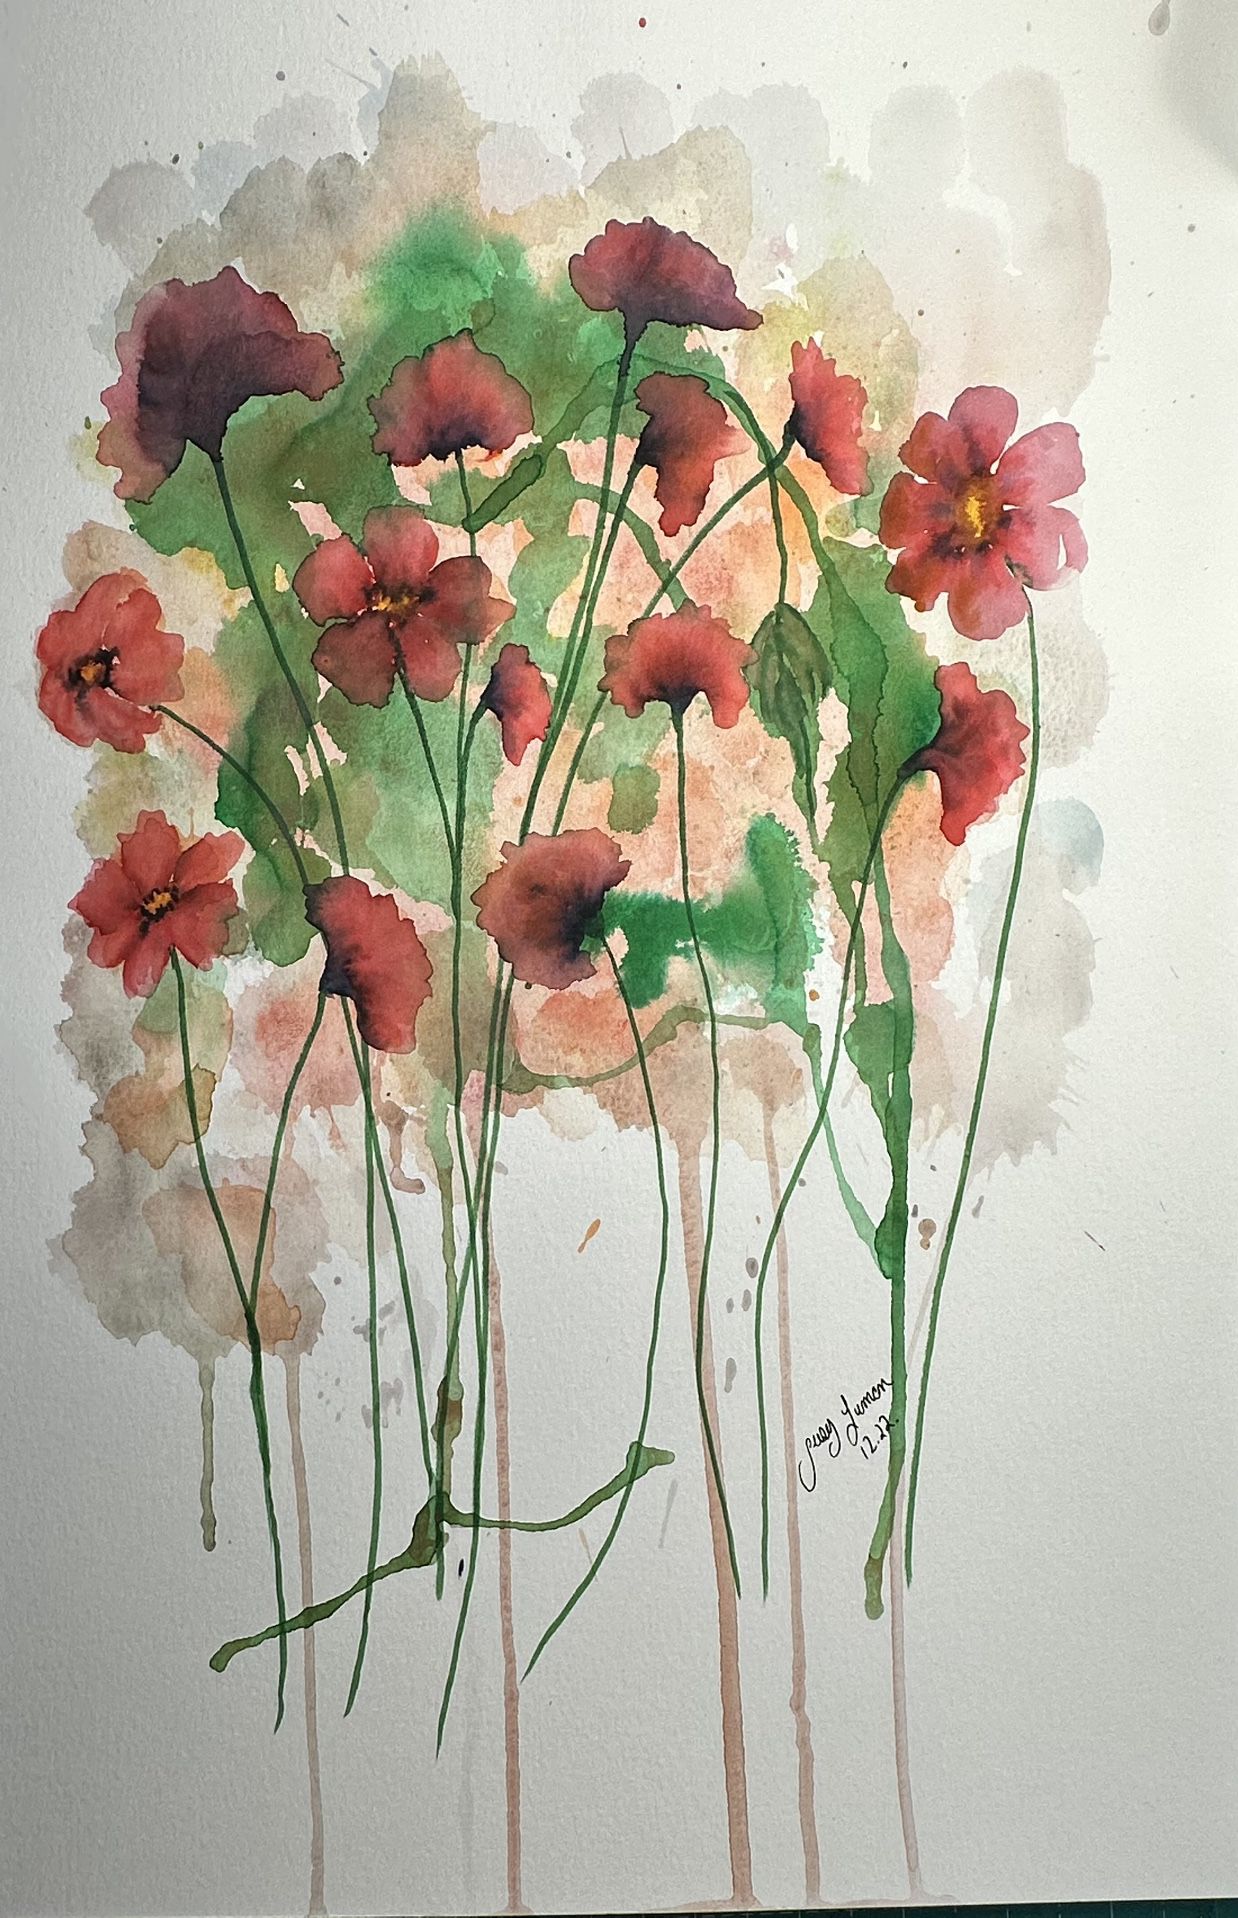 Original Watercolor Painting 12”x18” On Cansón Paper Handmade 